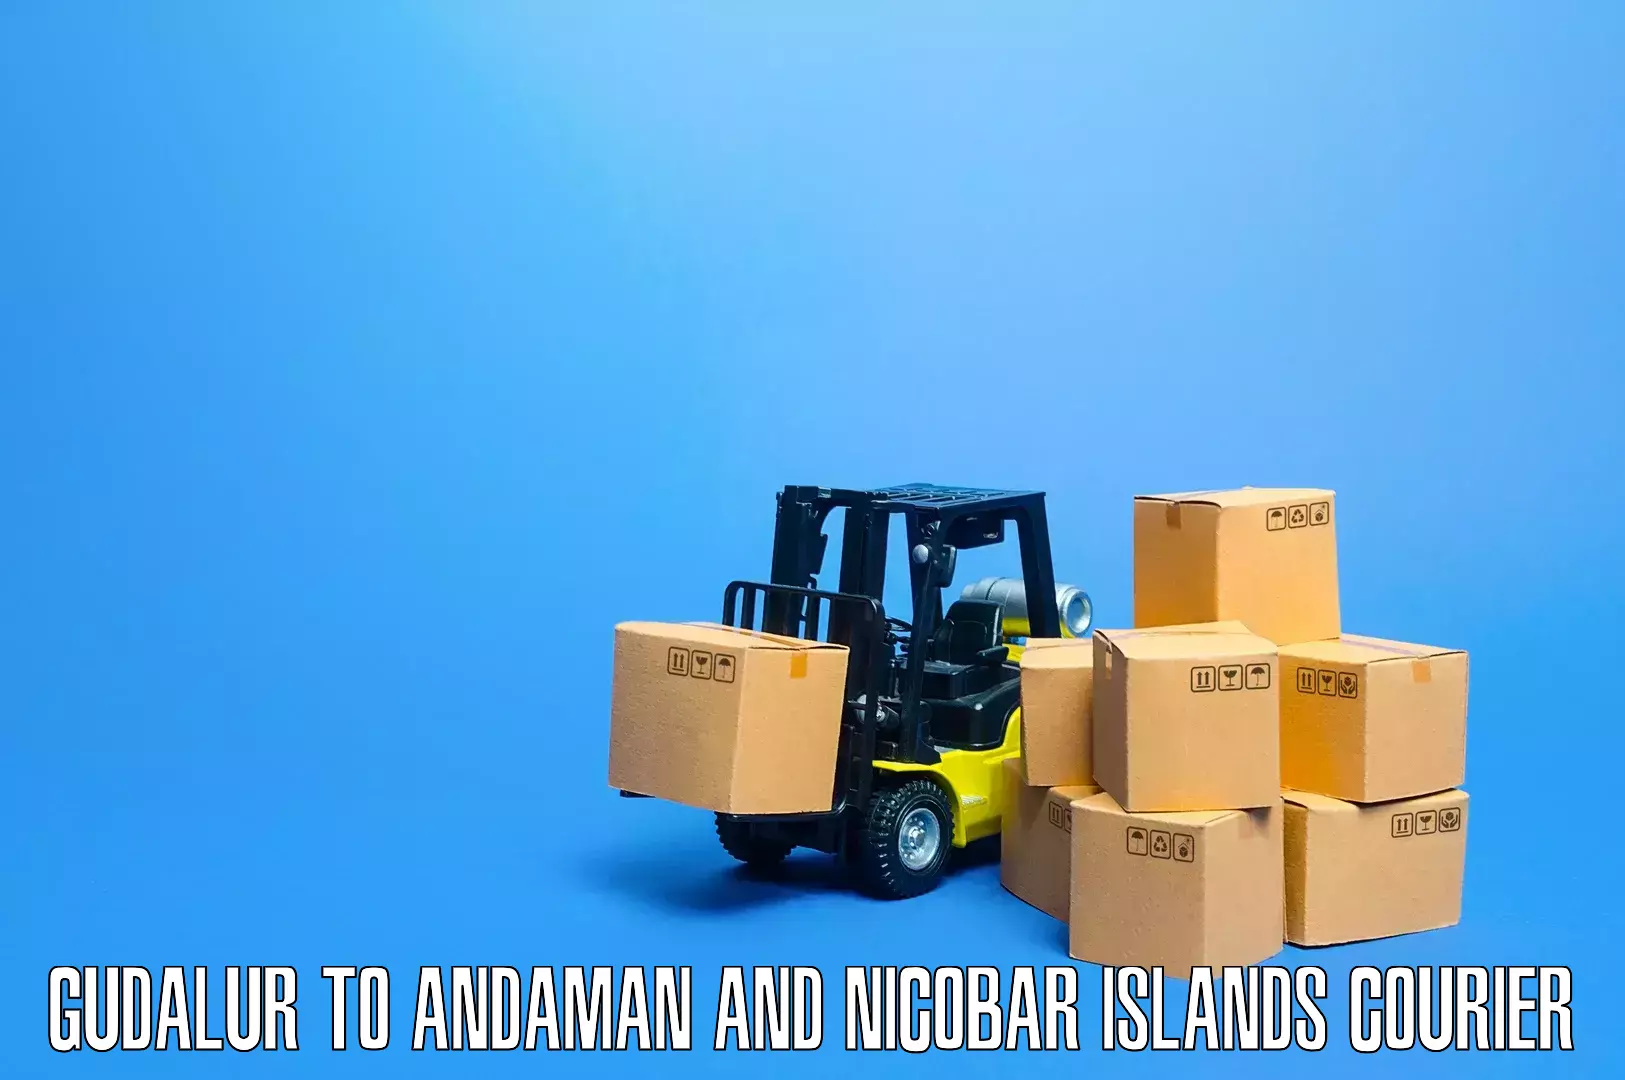 Furniture transport specialists Gudalur to Andaman and Nicobar Islands